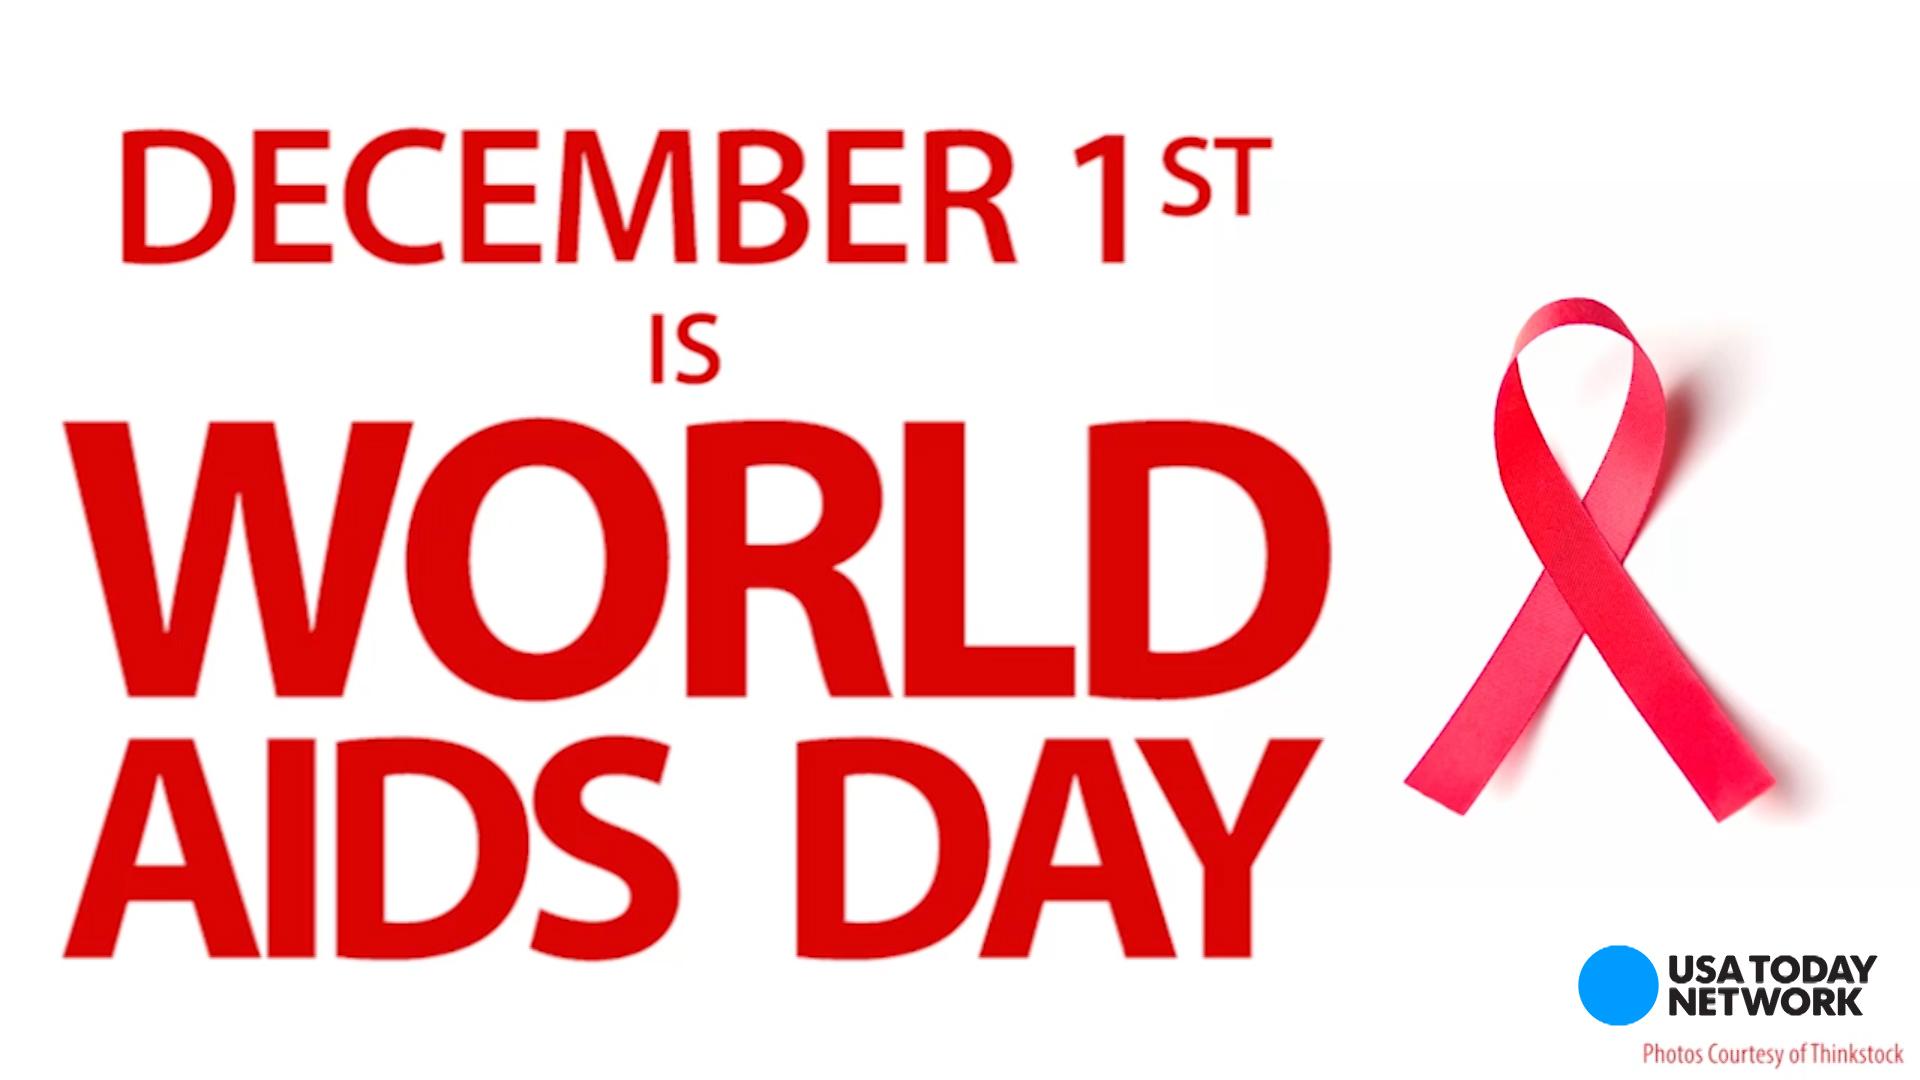 Staggering numbers on World AIDS Day